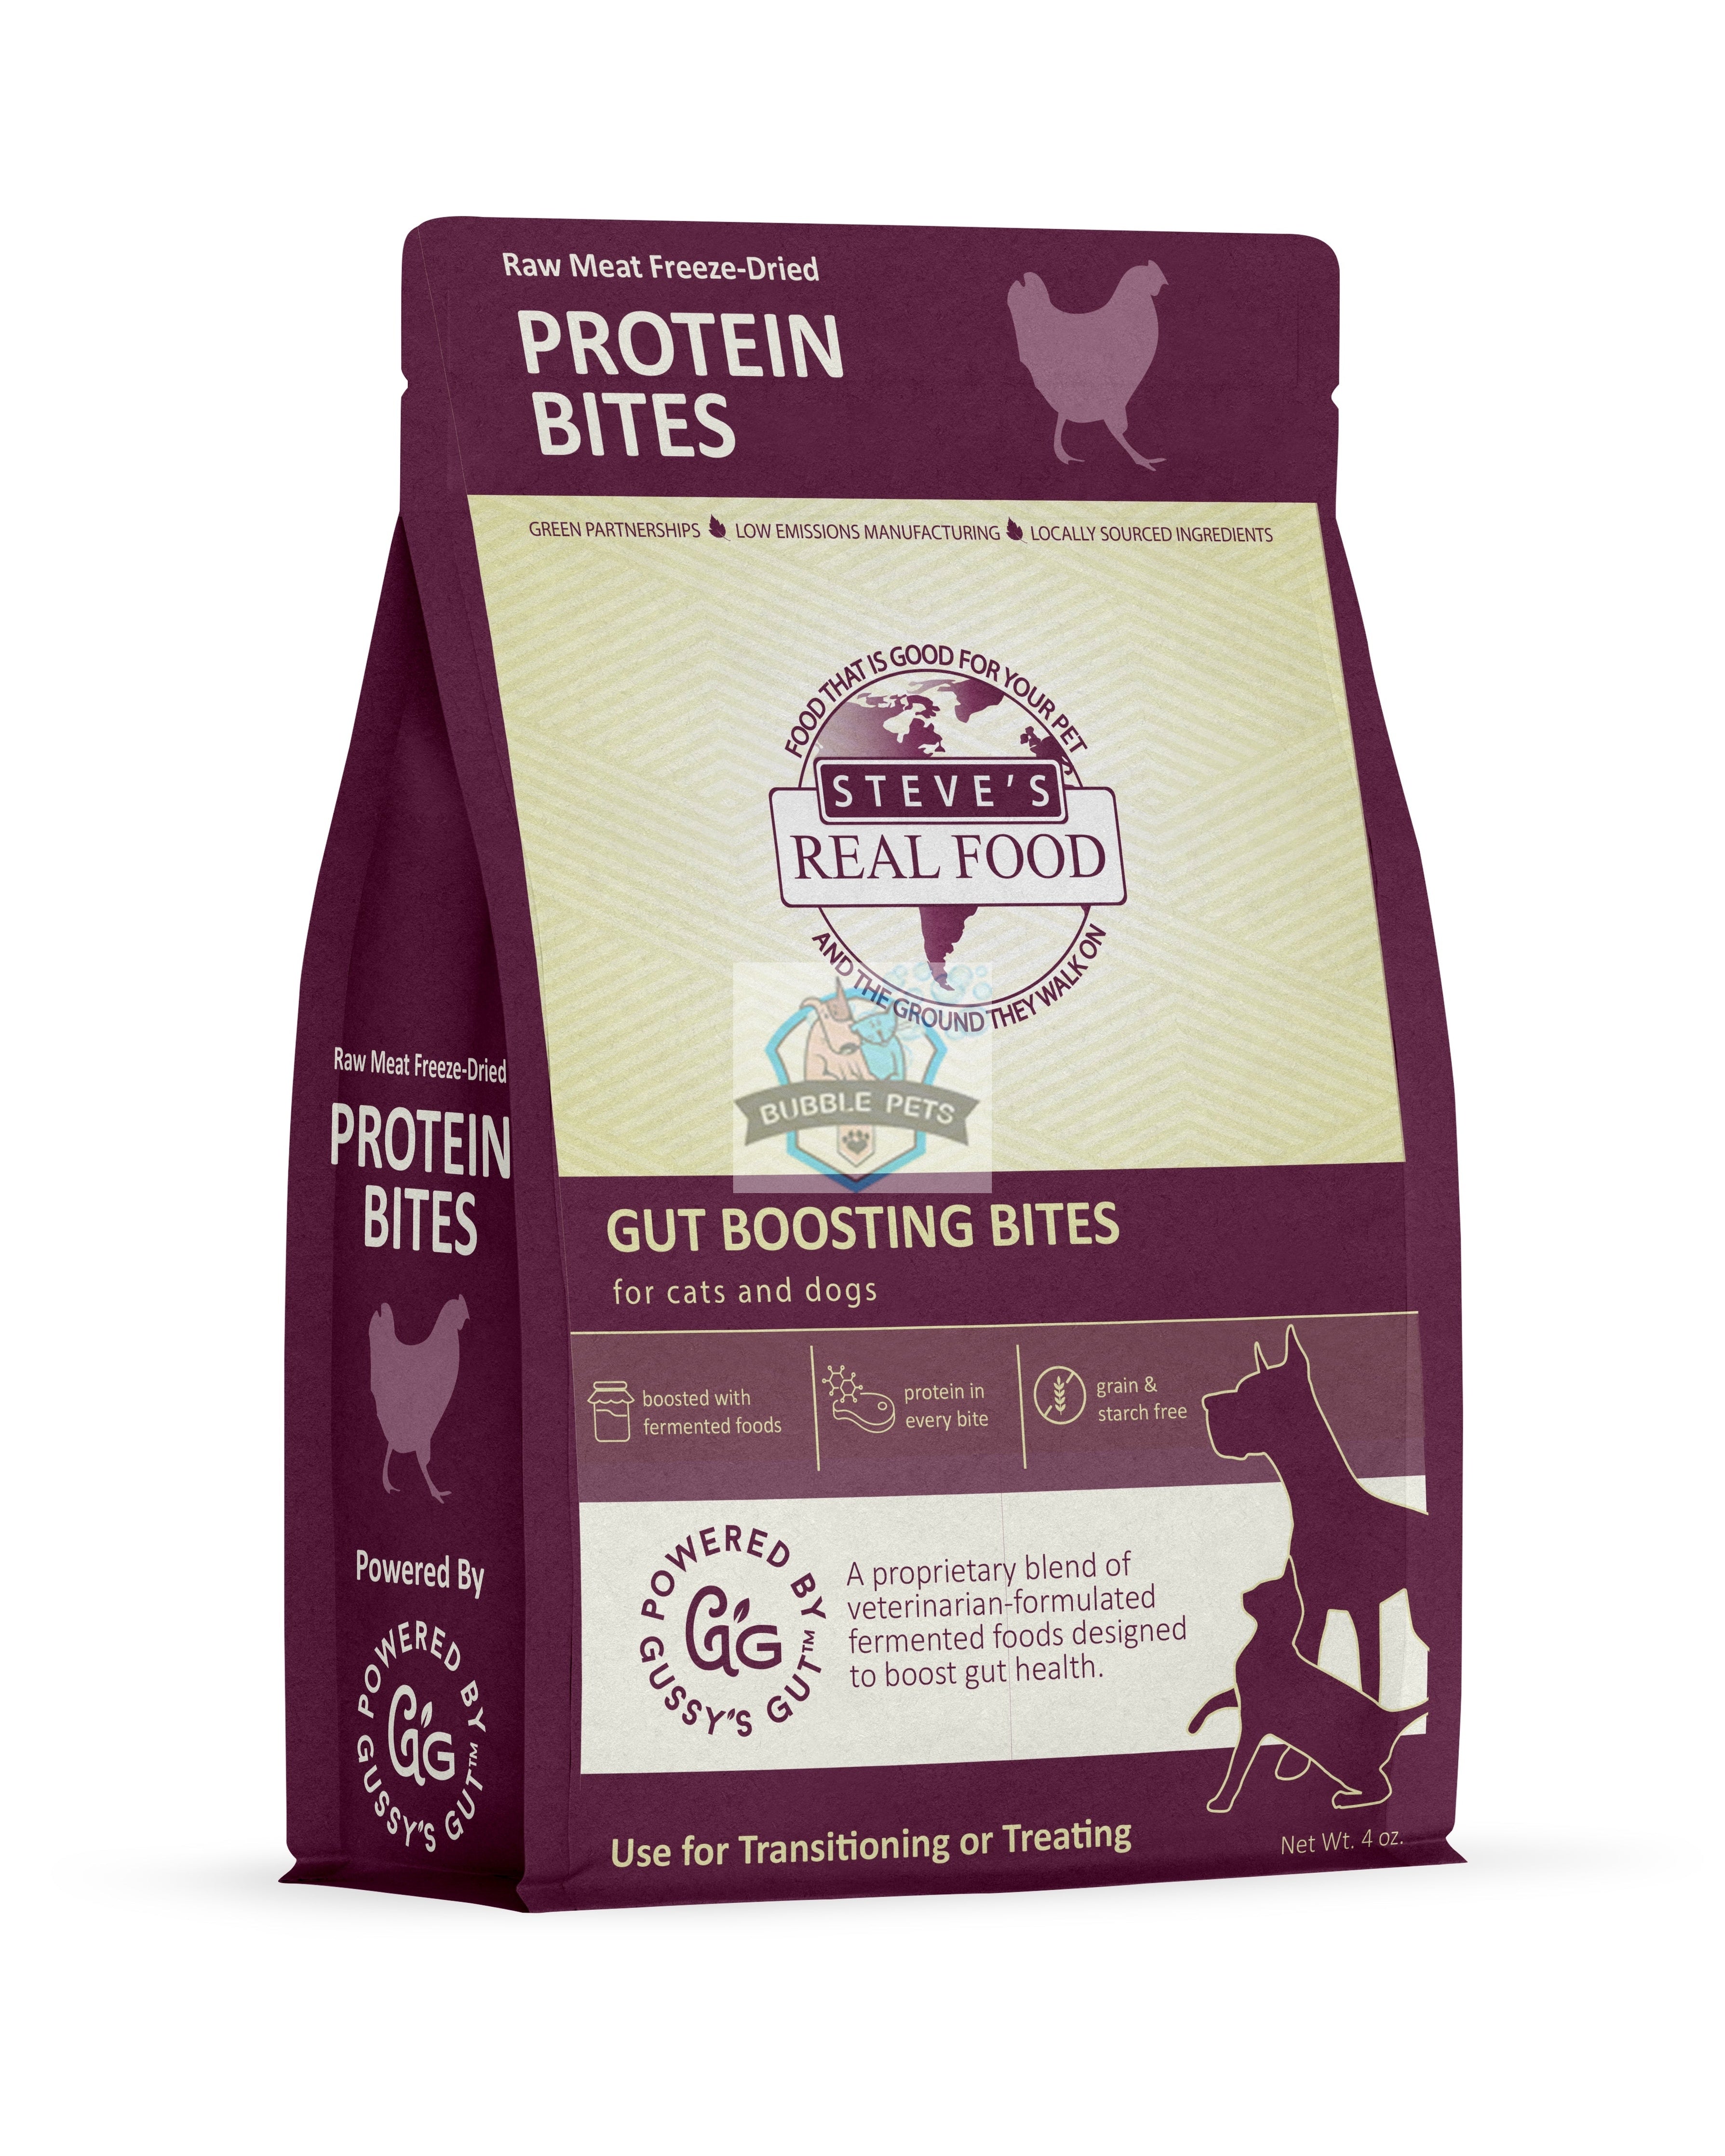 Steve's Real Food Freeze Dried Chicken Probiotics Protein Bites Dog and Cat Treat